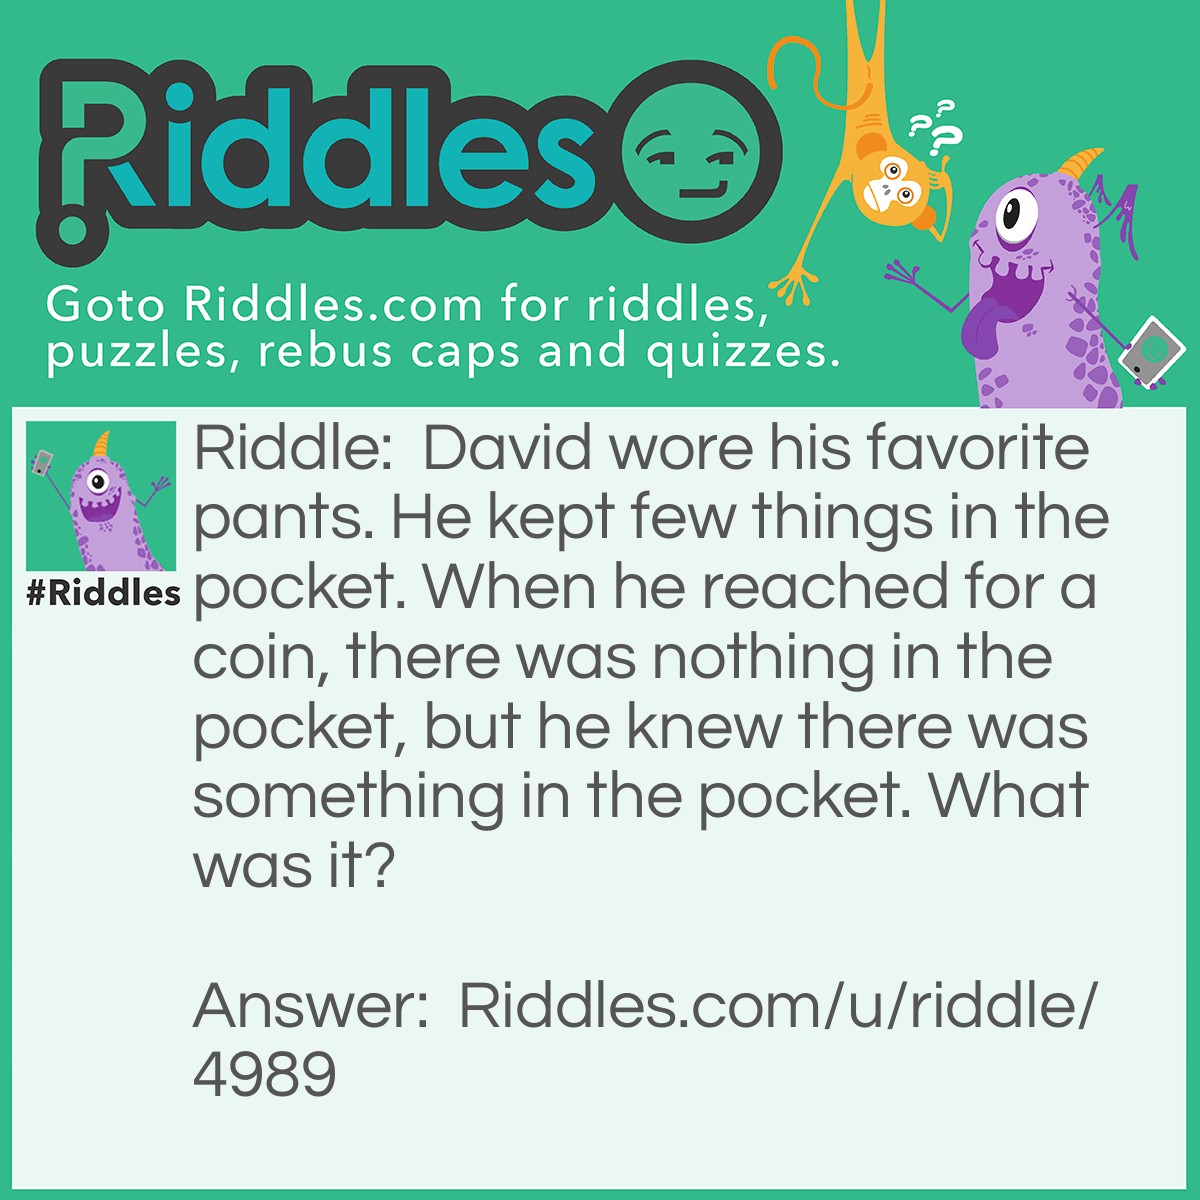 Riddle: David wore his favorite pants. He kept few things in the pocket. When he reached for a coin, there was nothing in the pocket, but he knew there was something in the pocket. What was it? Answer: A hole. There was a hole in the pocket.